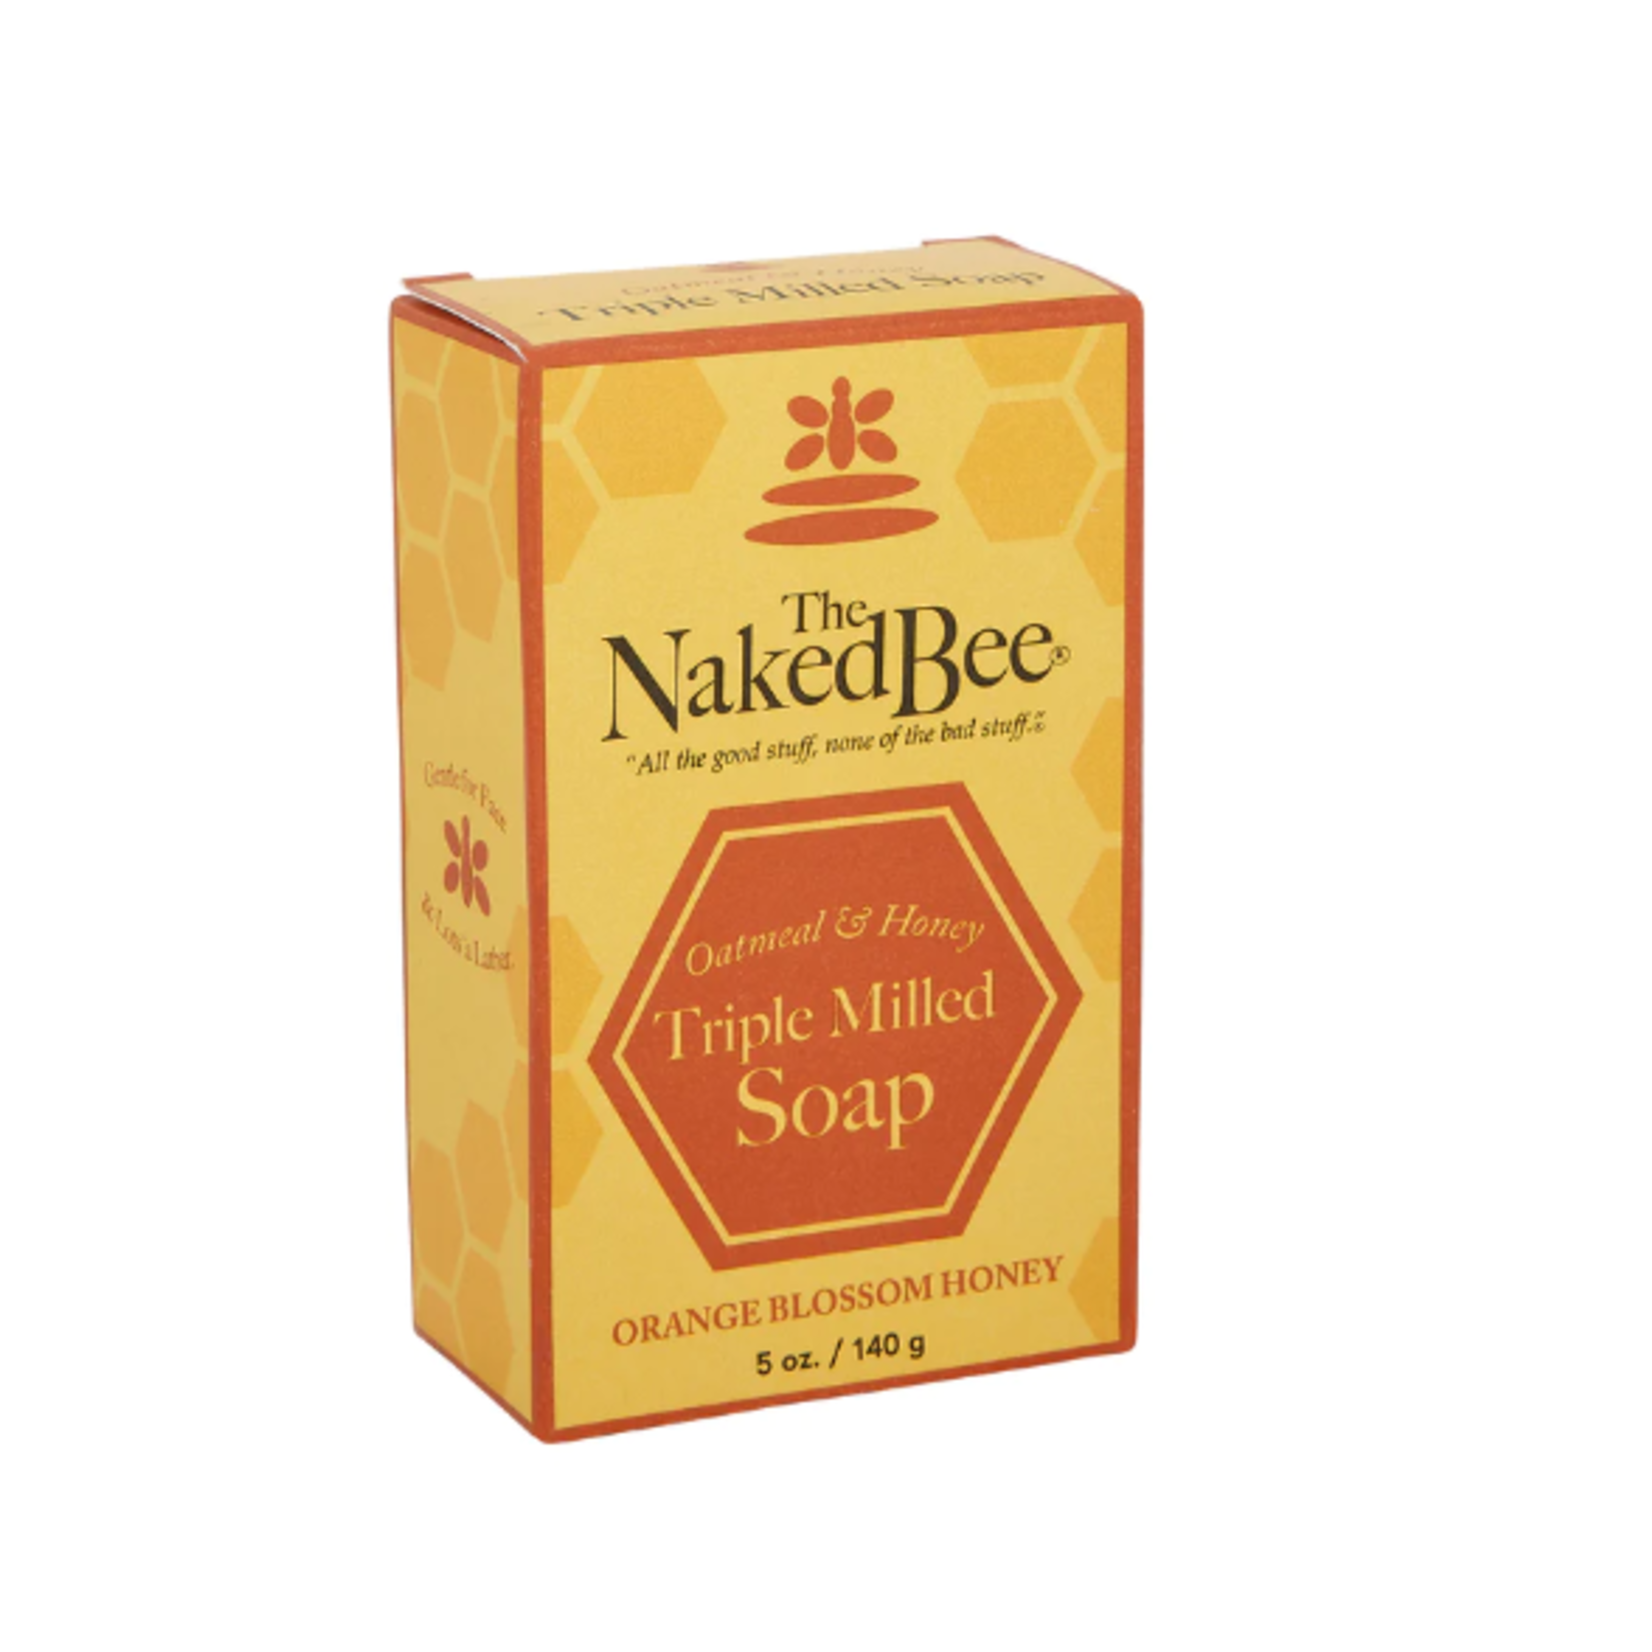 The Naked Bee The Naked Bee Triple Milled Soap Orange Blossom Honey